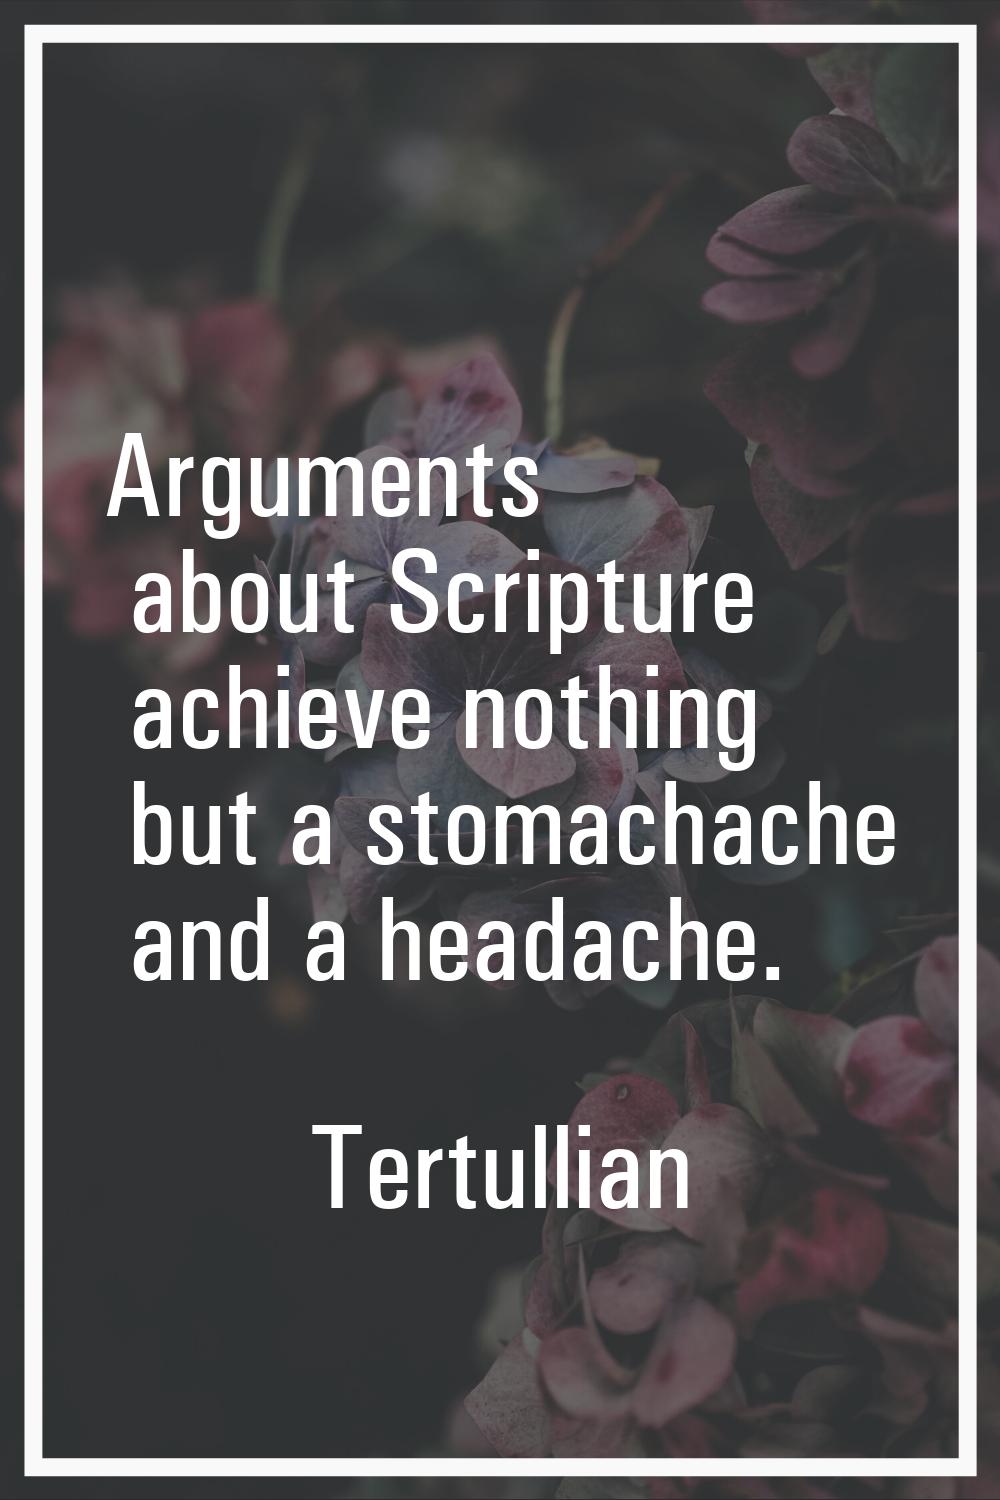 Arguments about Scripture achieve nothing but a stomachache and a headache.